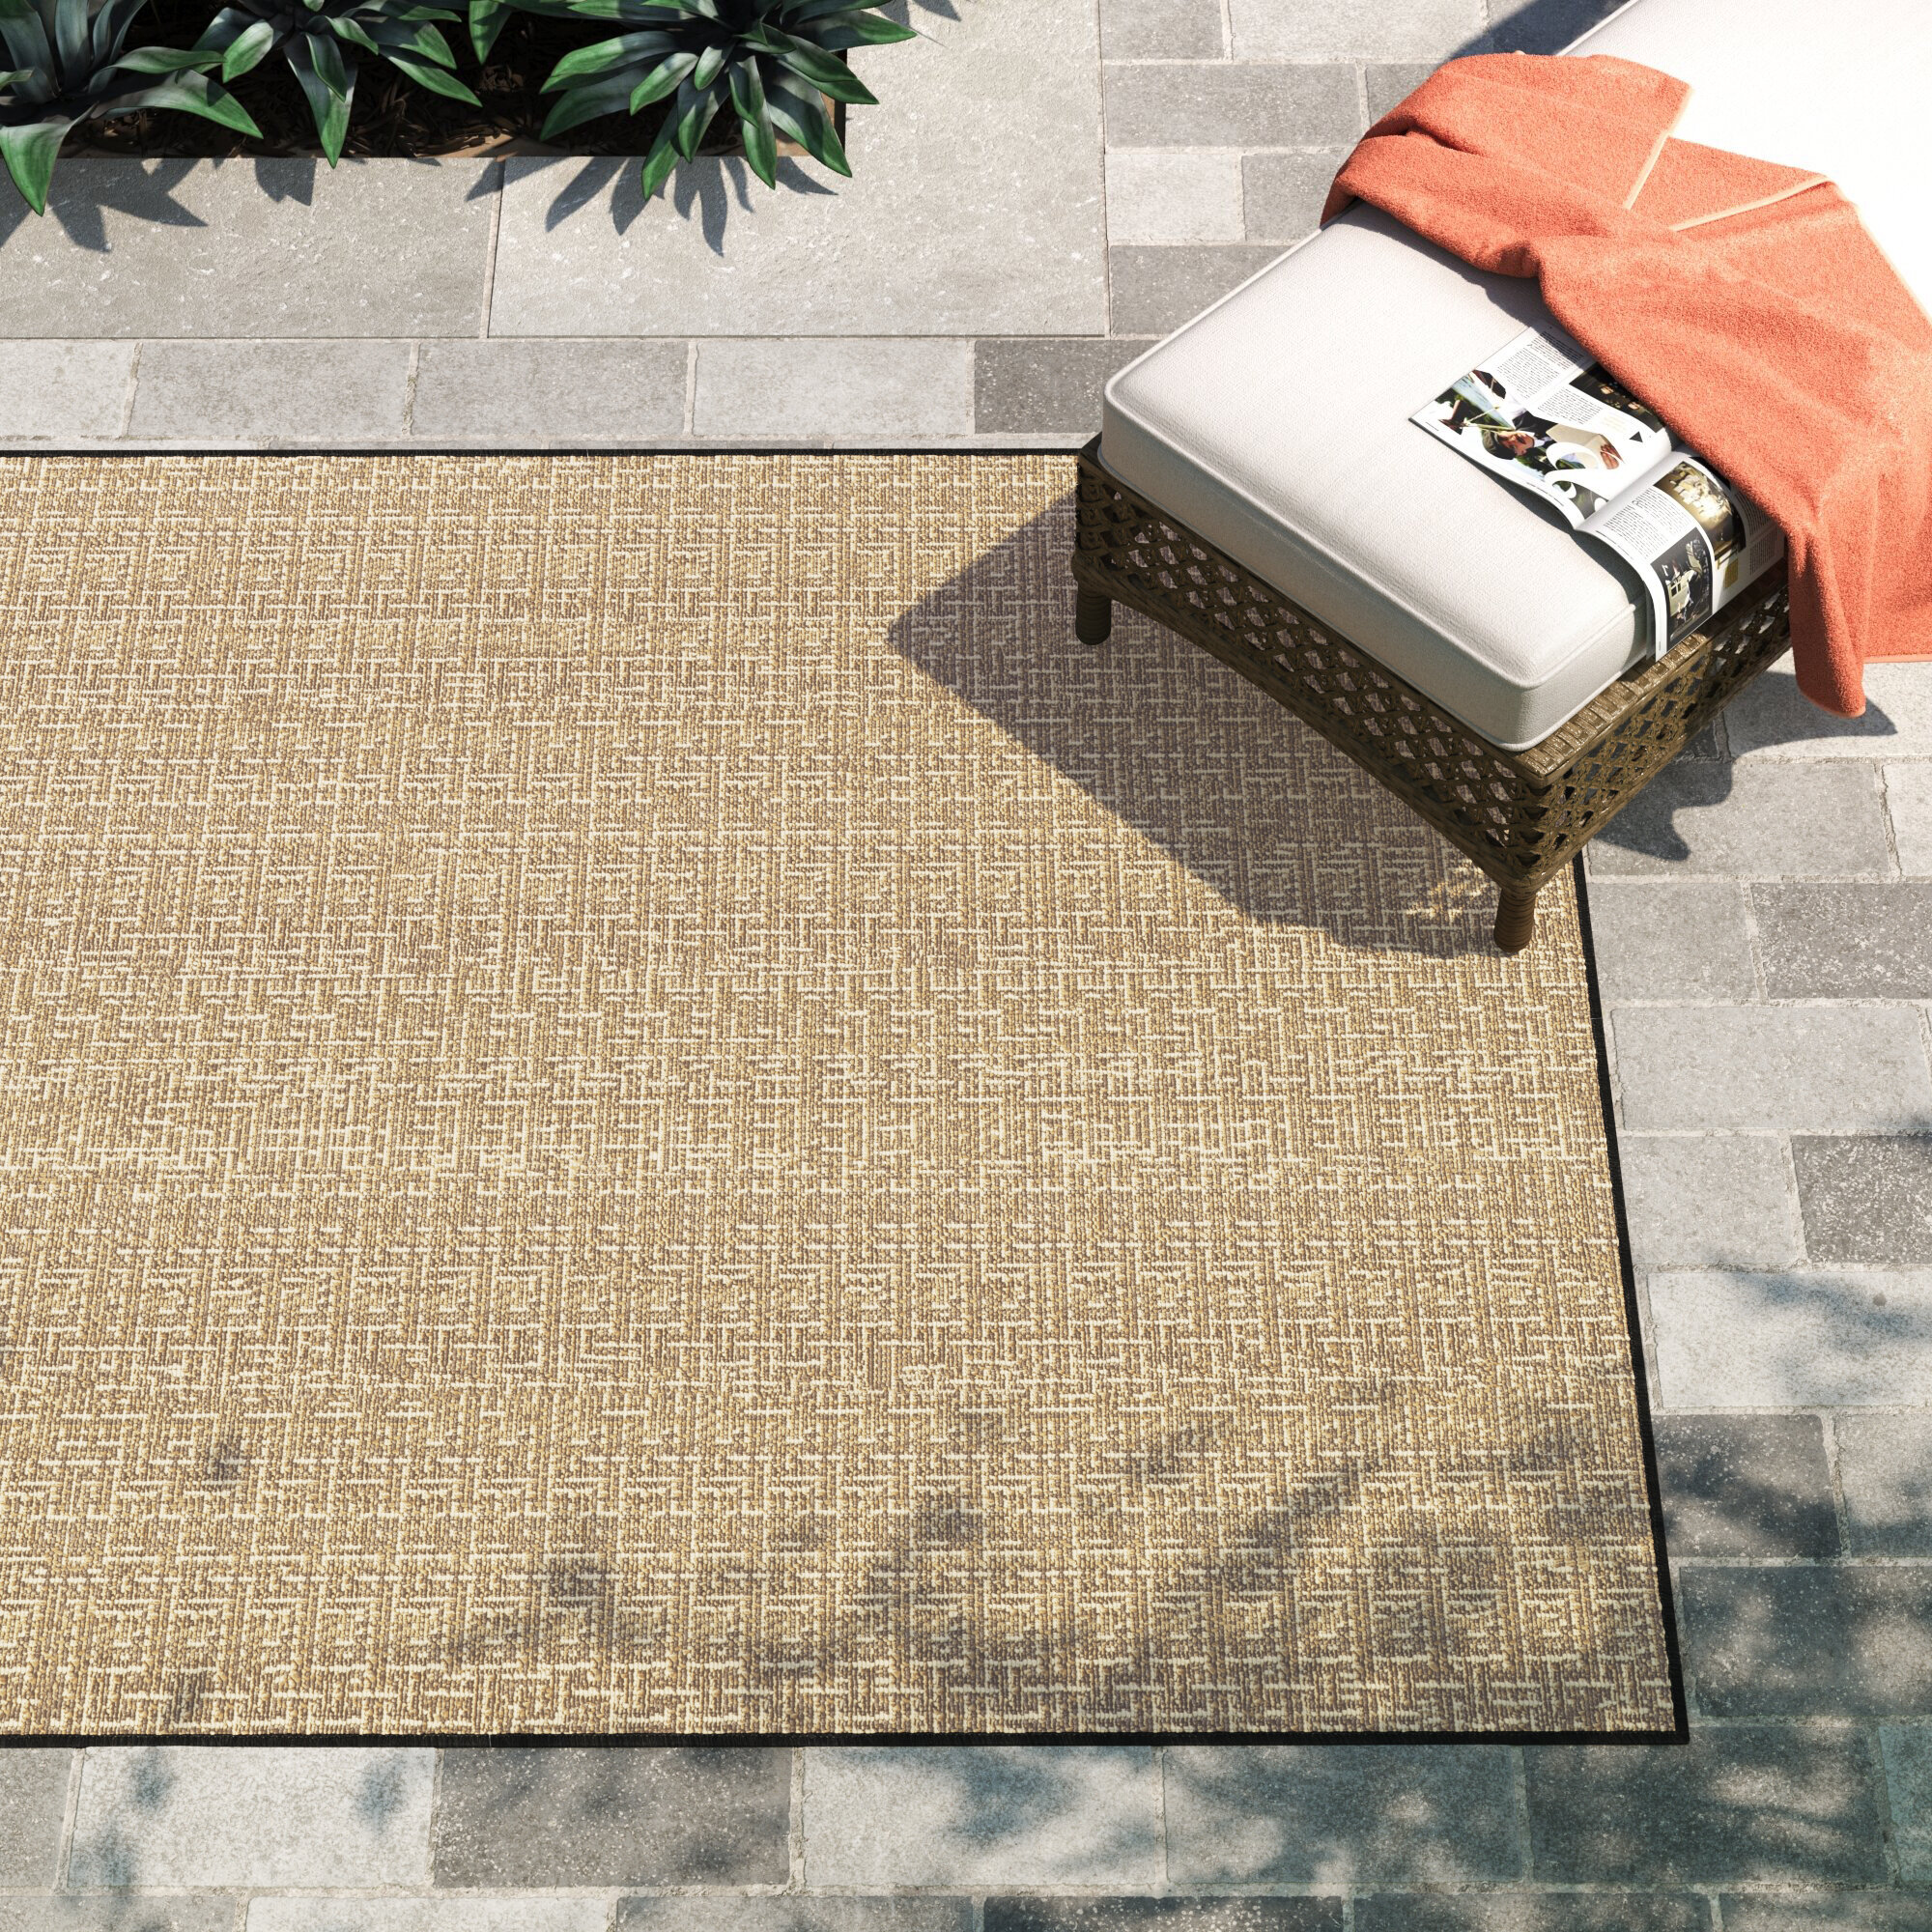 Roselyn Geometric Power Loom Beige Indoor/Outdoor Patio Rug Sand & Stable Rug Size: Rectangle 5' x 8